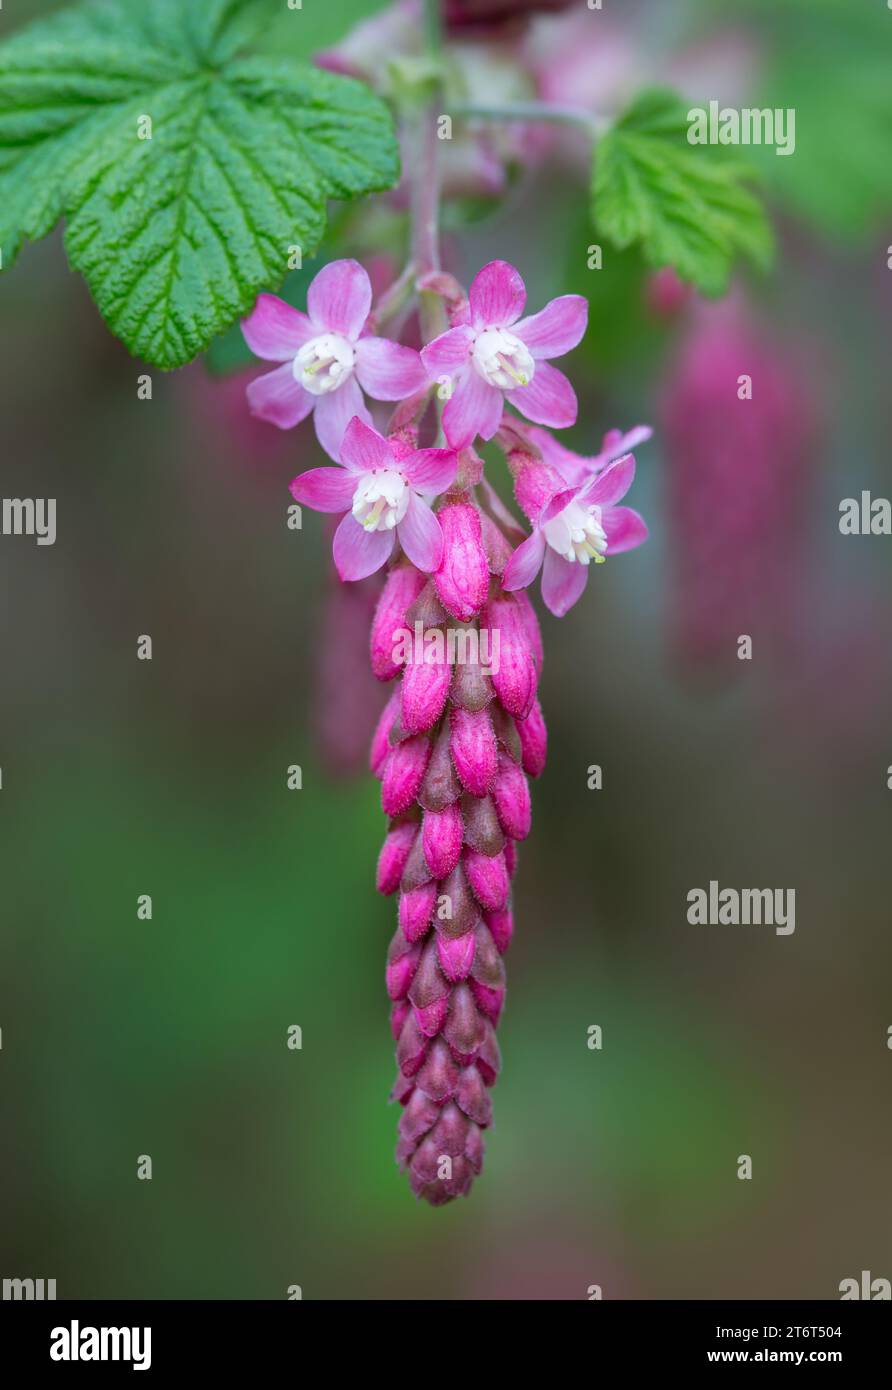 Flowering Current [ Ribes ] flower close up Stock Photo